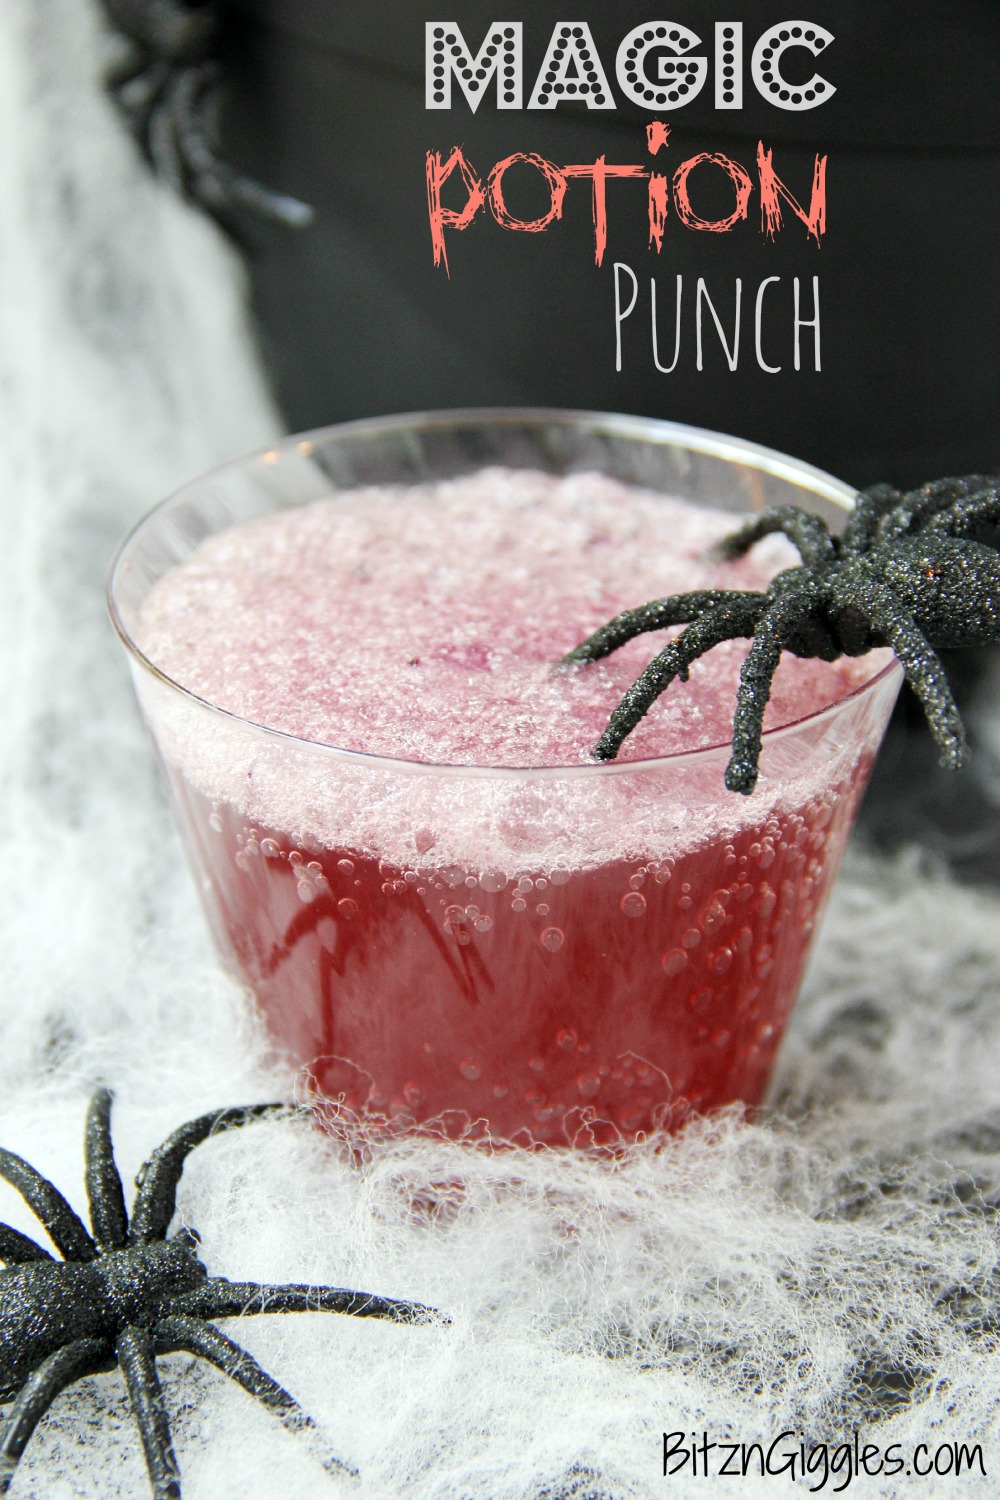 Magic Potion Punch â€“ A magical punch that fizzes and bubbles when you add the secret ingredient. Tastes delicious, too! Great for mad scientist and Halloween parties or just anytime you need a little magic.